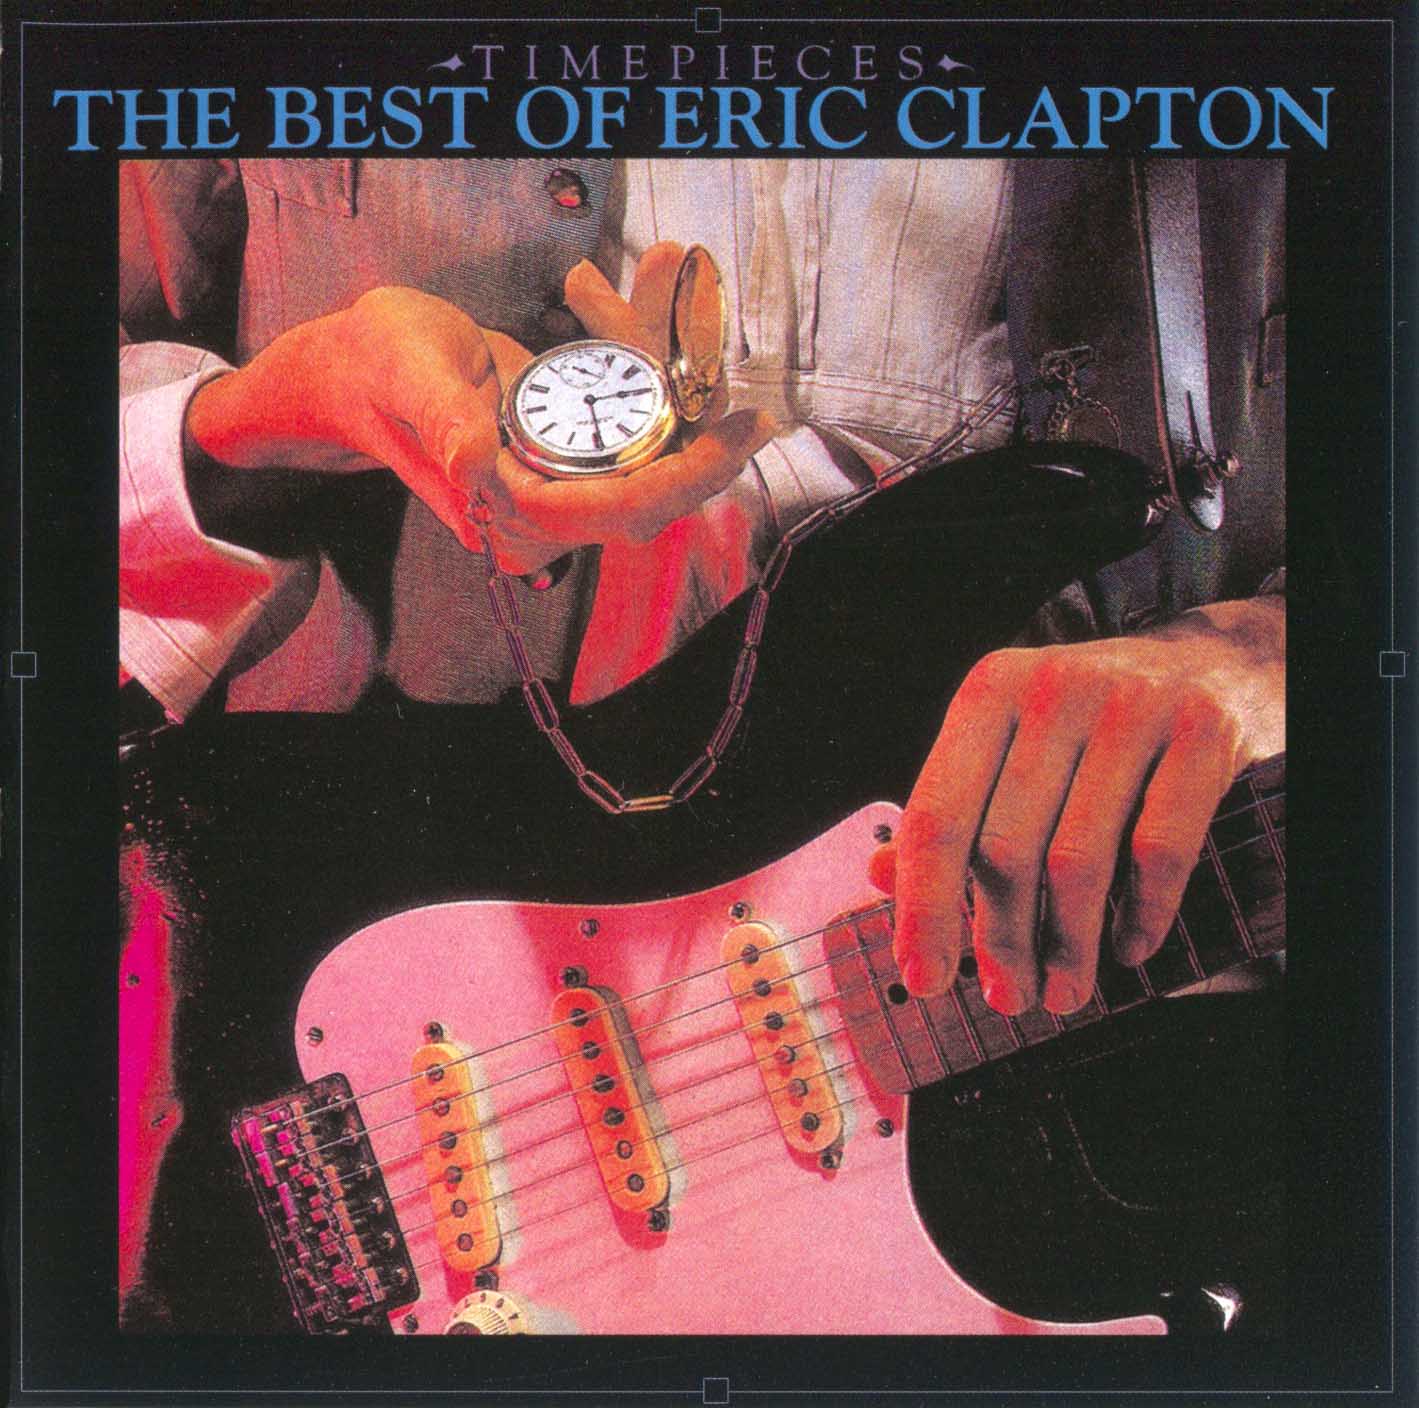 Eric Clapton – Time Pieces: The Best Of Eric Clapton (1982) [Audio Fidelity ‘2014] {SACD ISO + FLAC 24bit/88.2kHz}